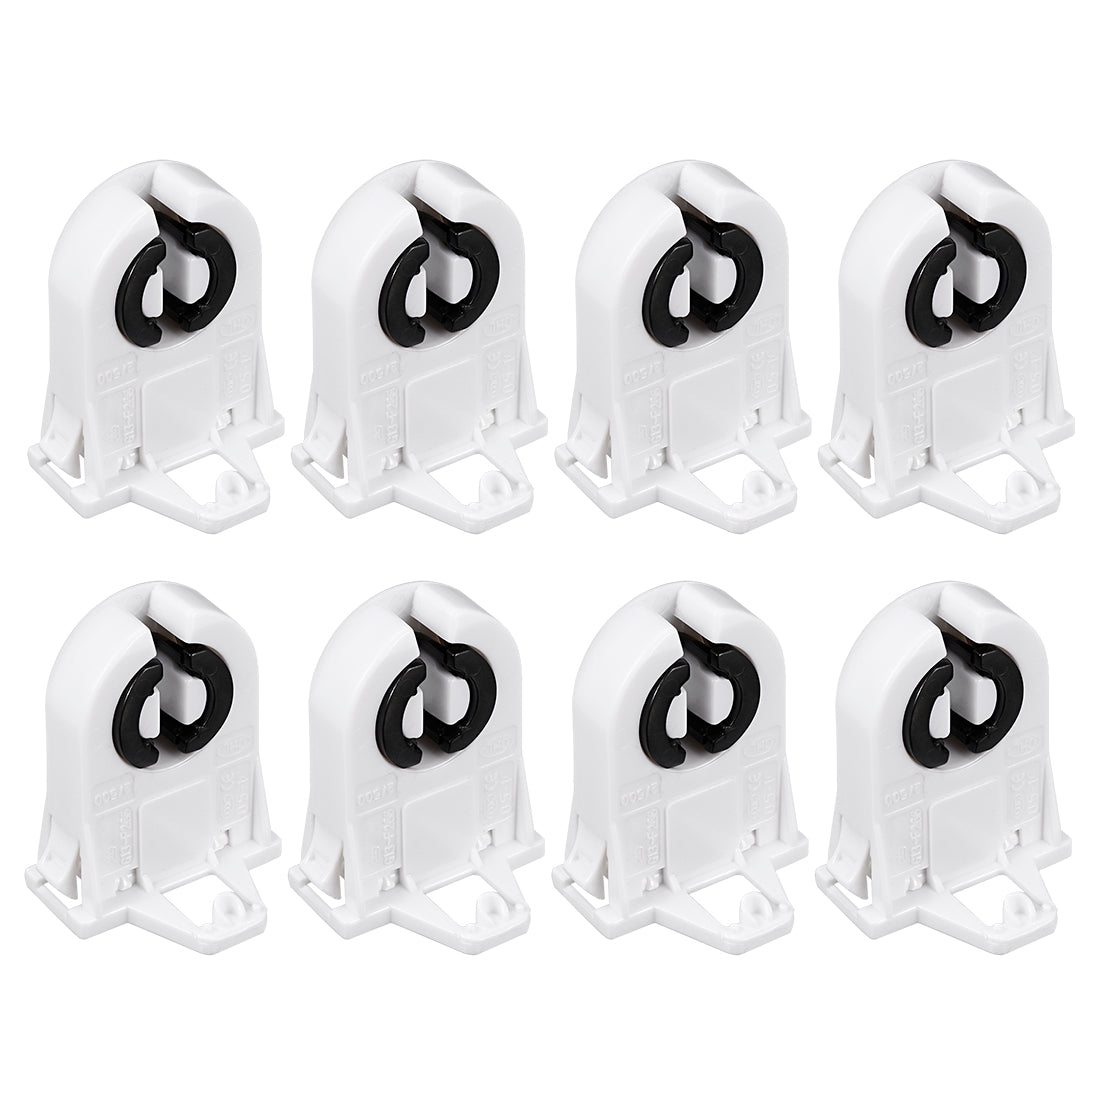 uxcell Uxcell 8 Pcs 2A G13-F266 T8 Socket G13 Base Fluorescent Lamp Holder Light Accessory White